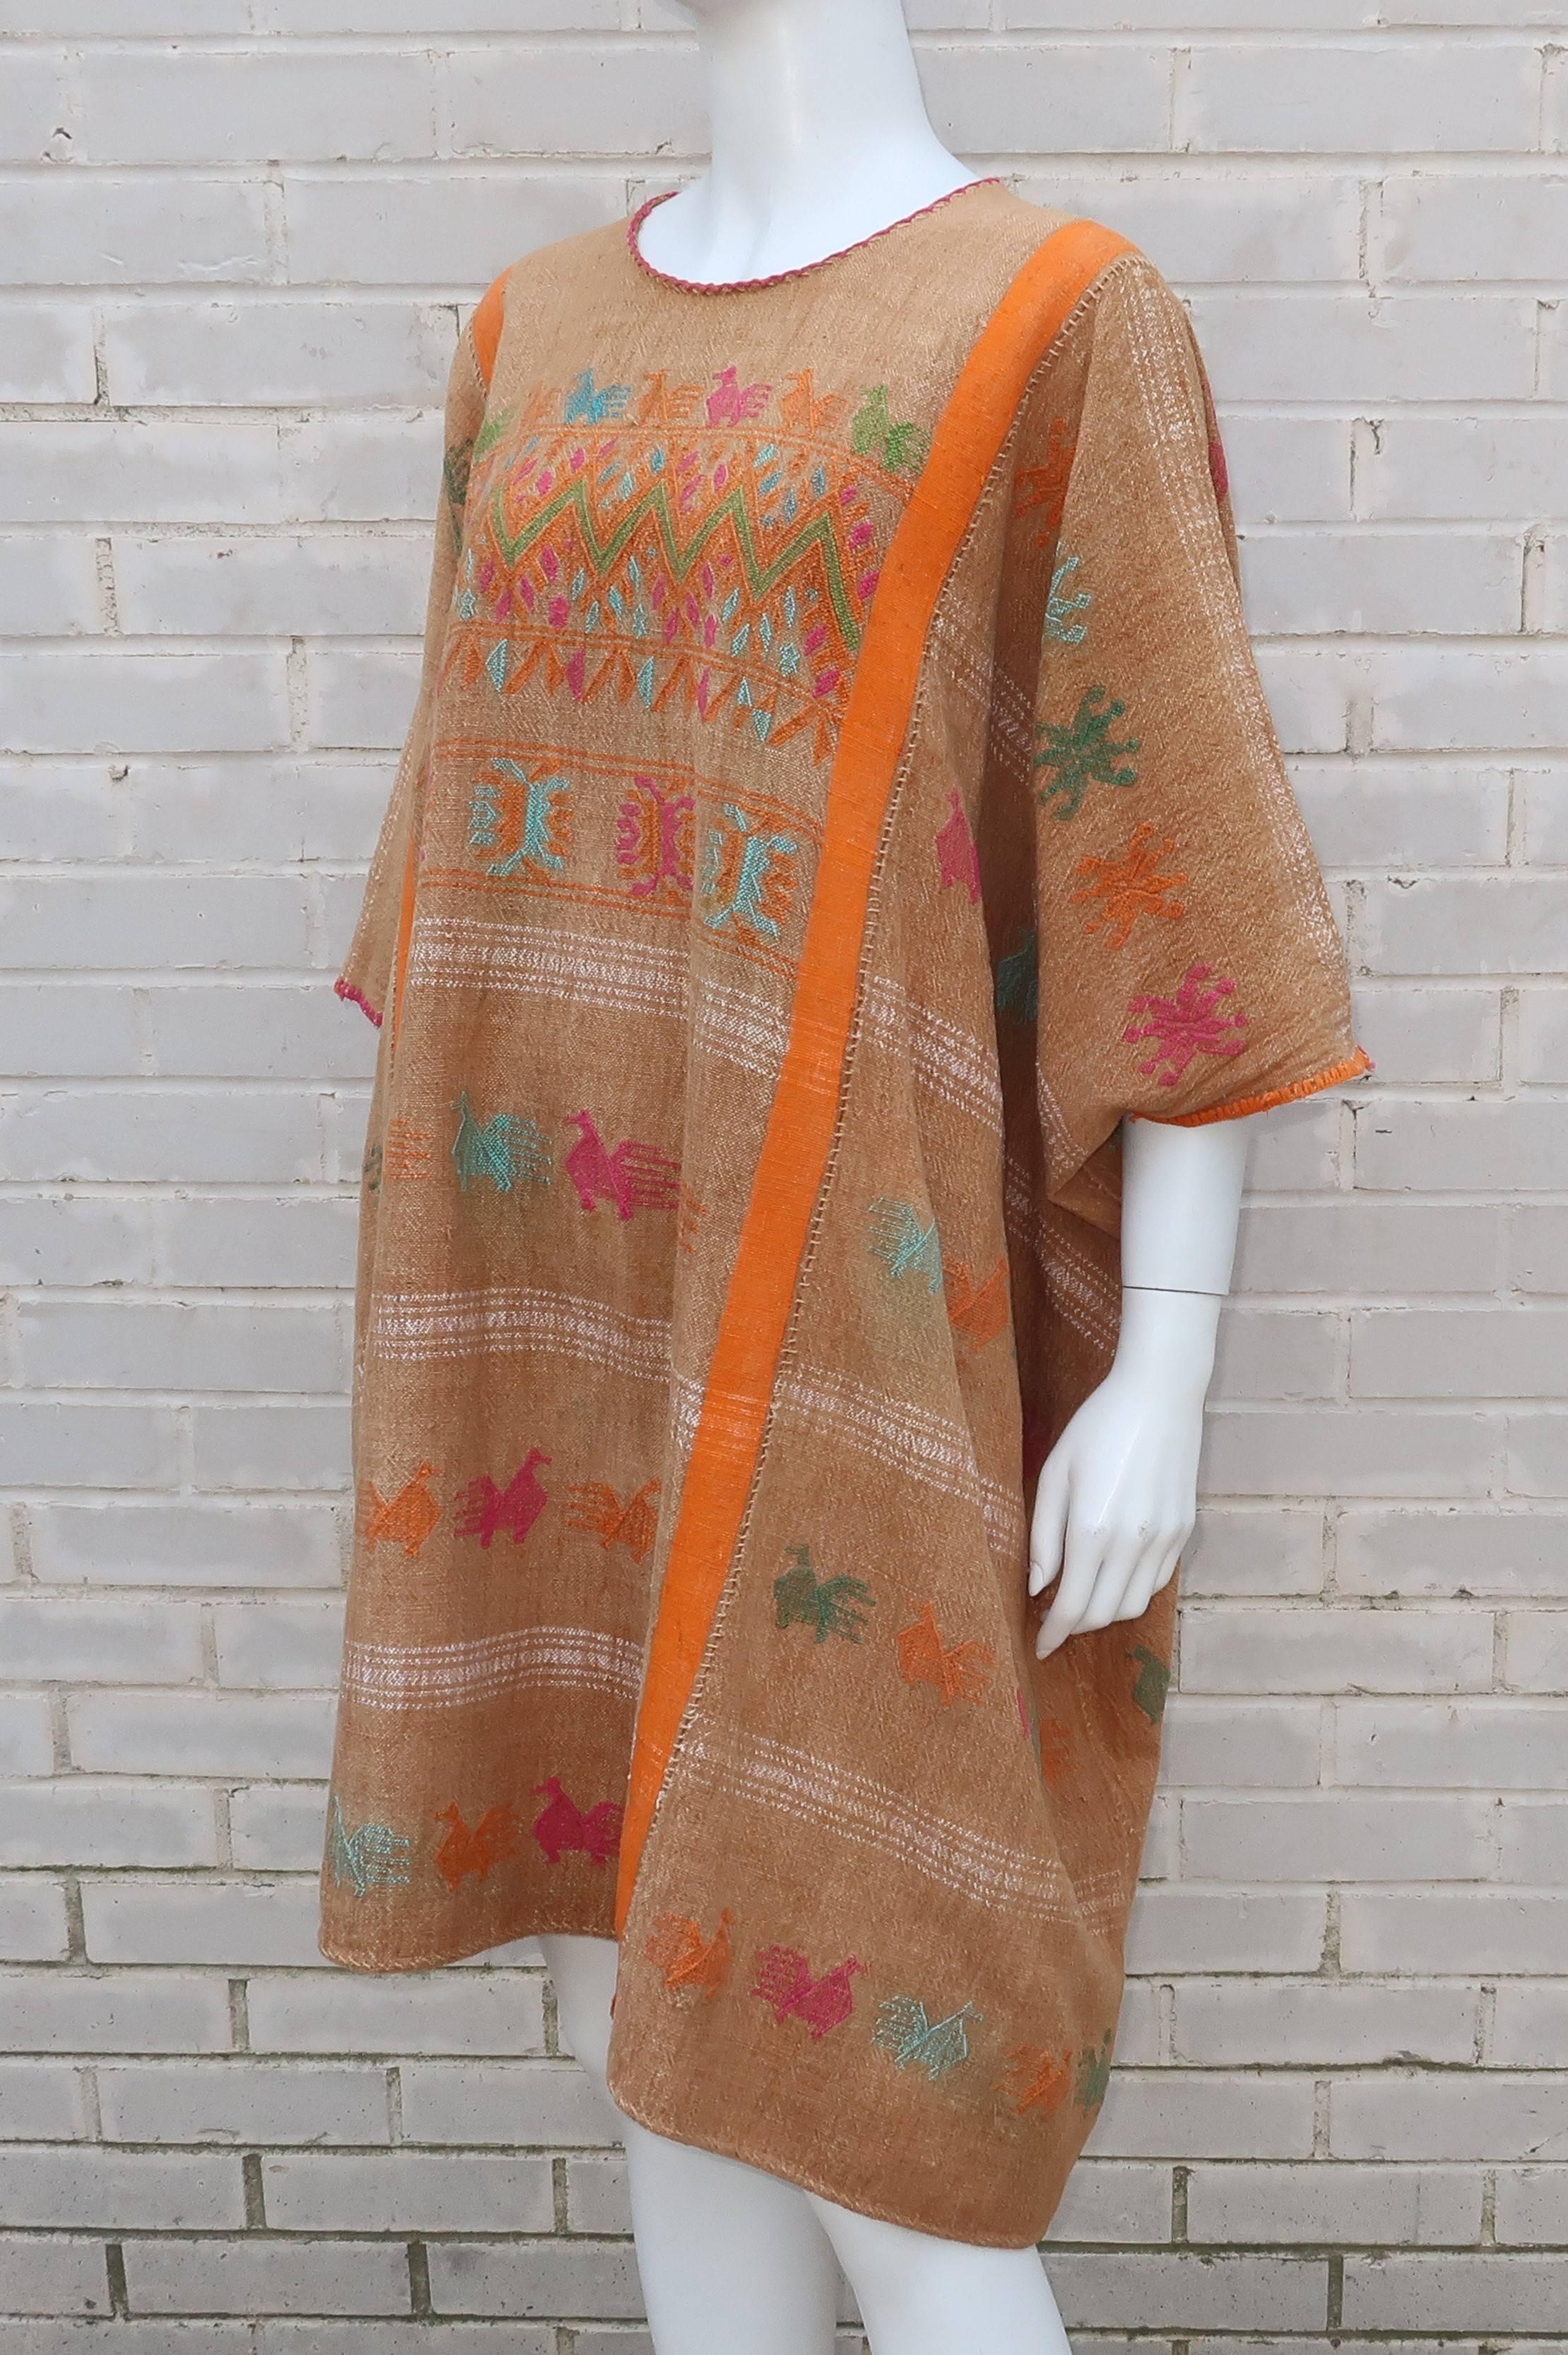 Women's Vintage Hand Woven Caftan Tunic With Animal Motif